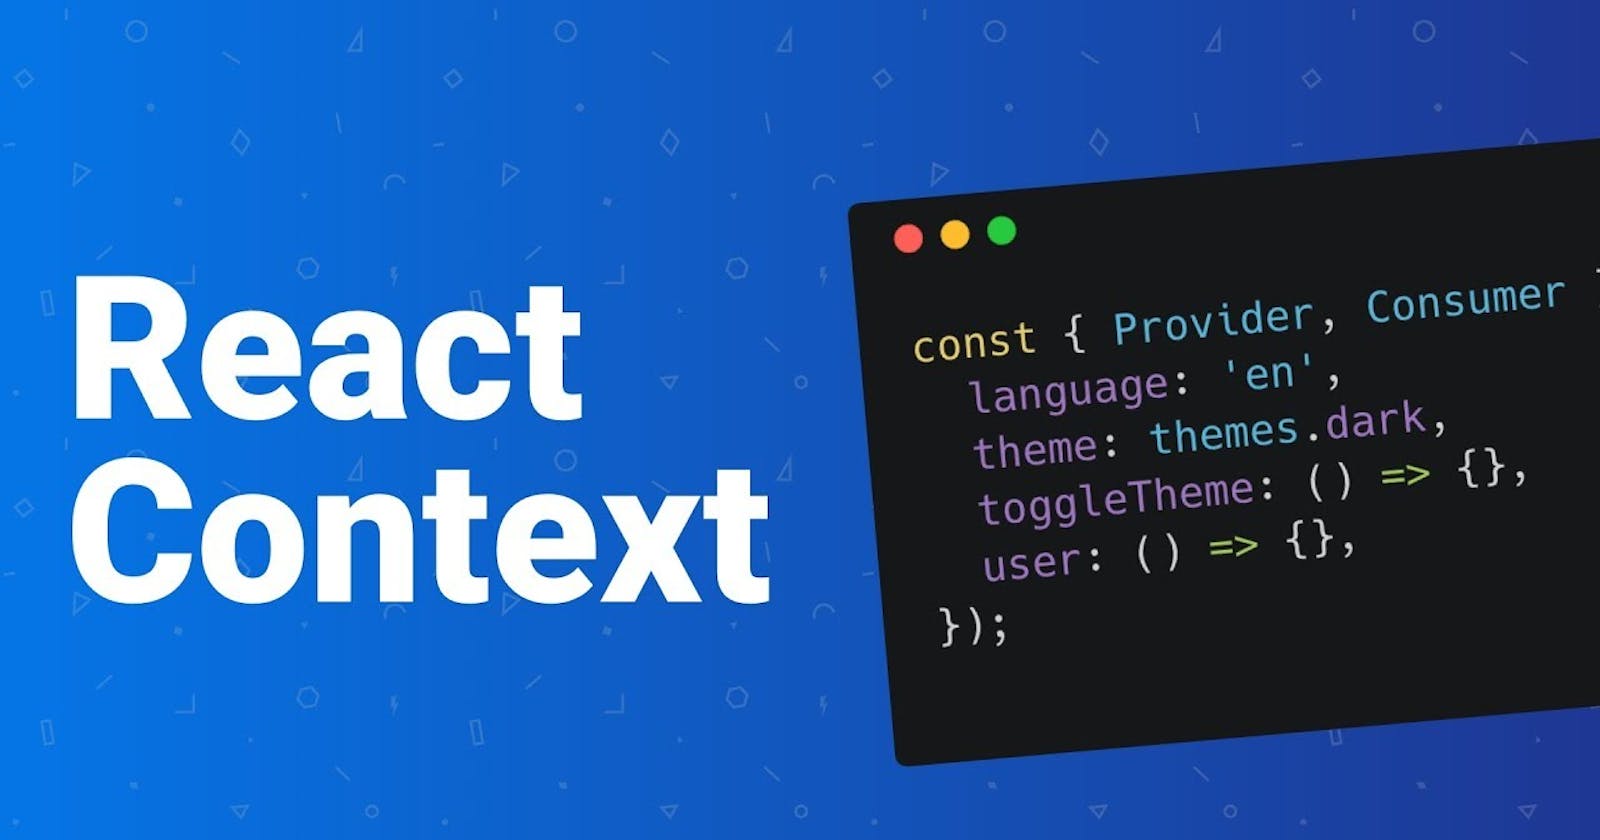 Learn Context in React in simple steps